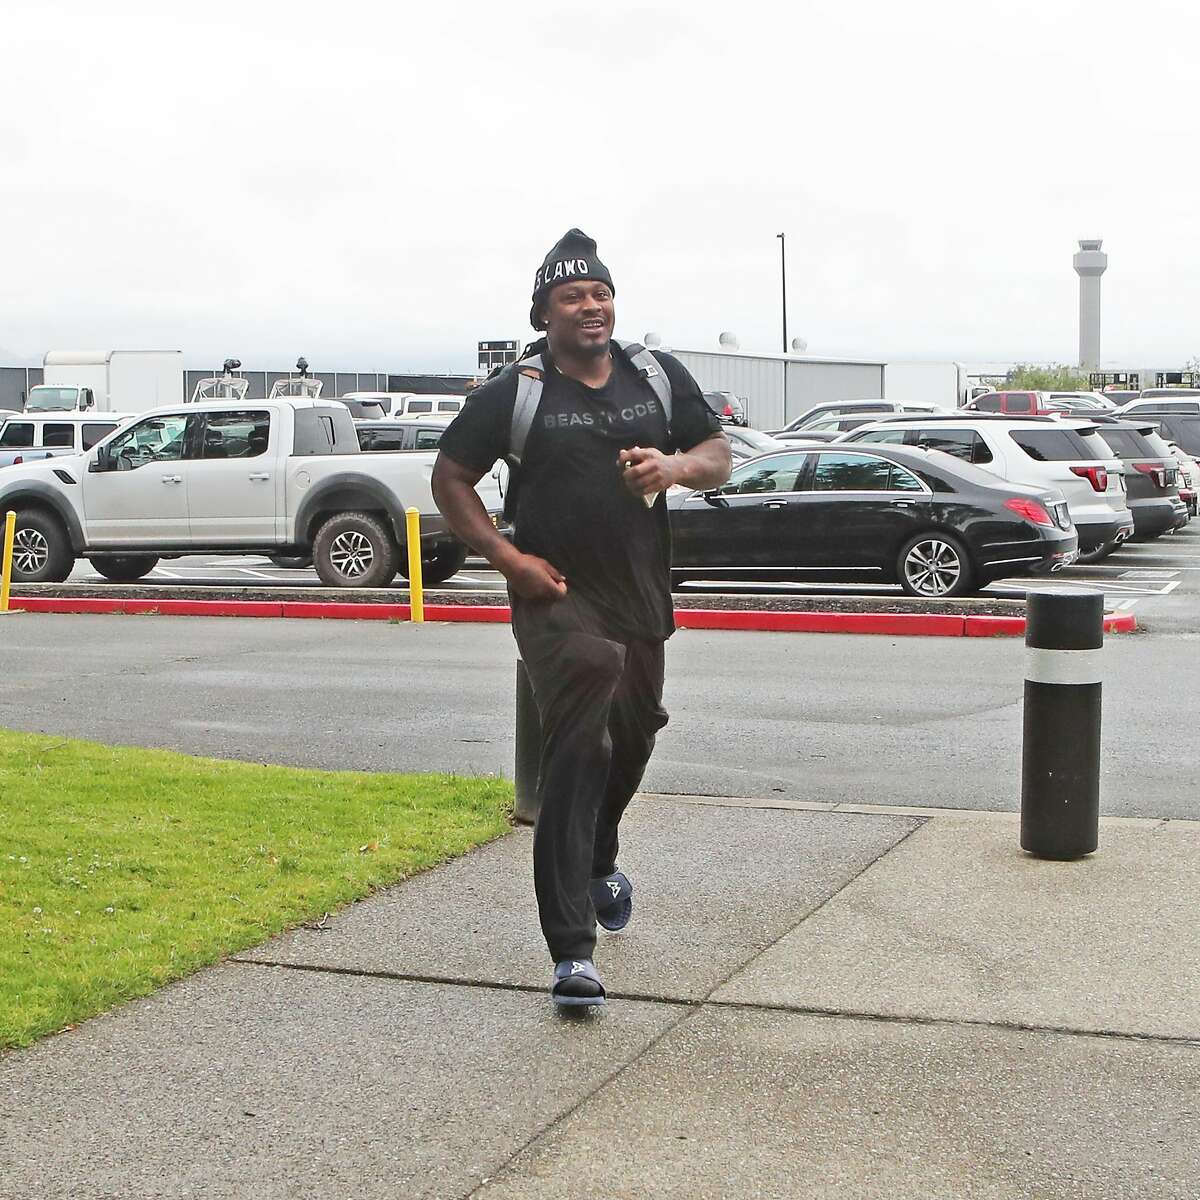 Oakland native and Cal alum Marshawn Lynch was all smiles Wednesday after agreeing to a two-year deal with the Raiders.